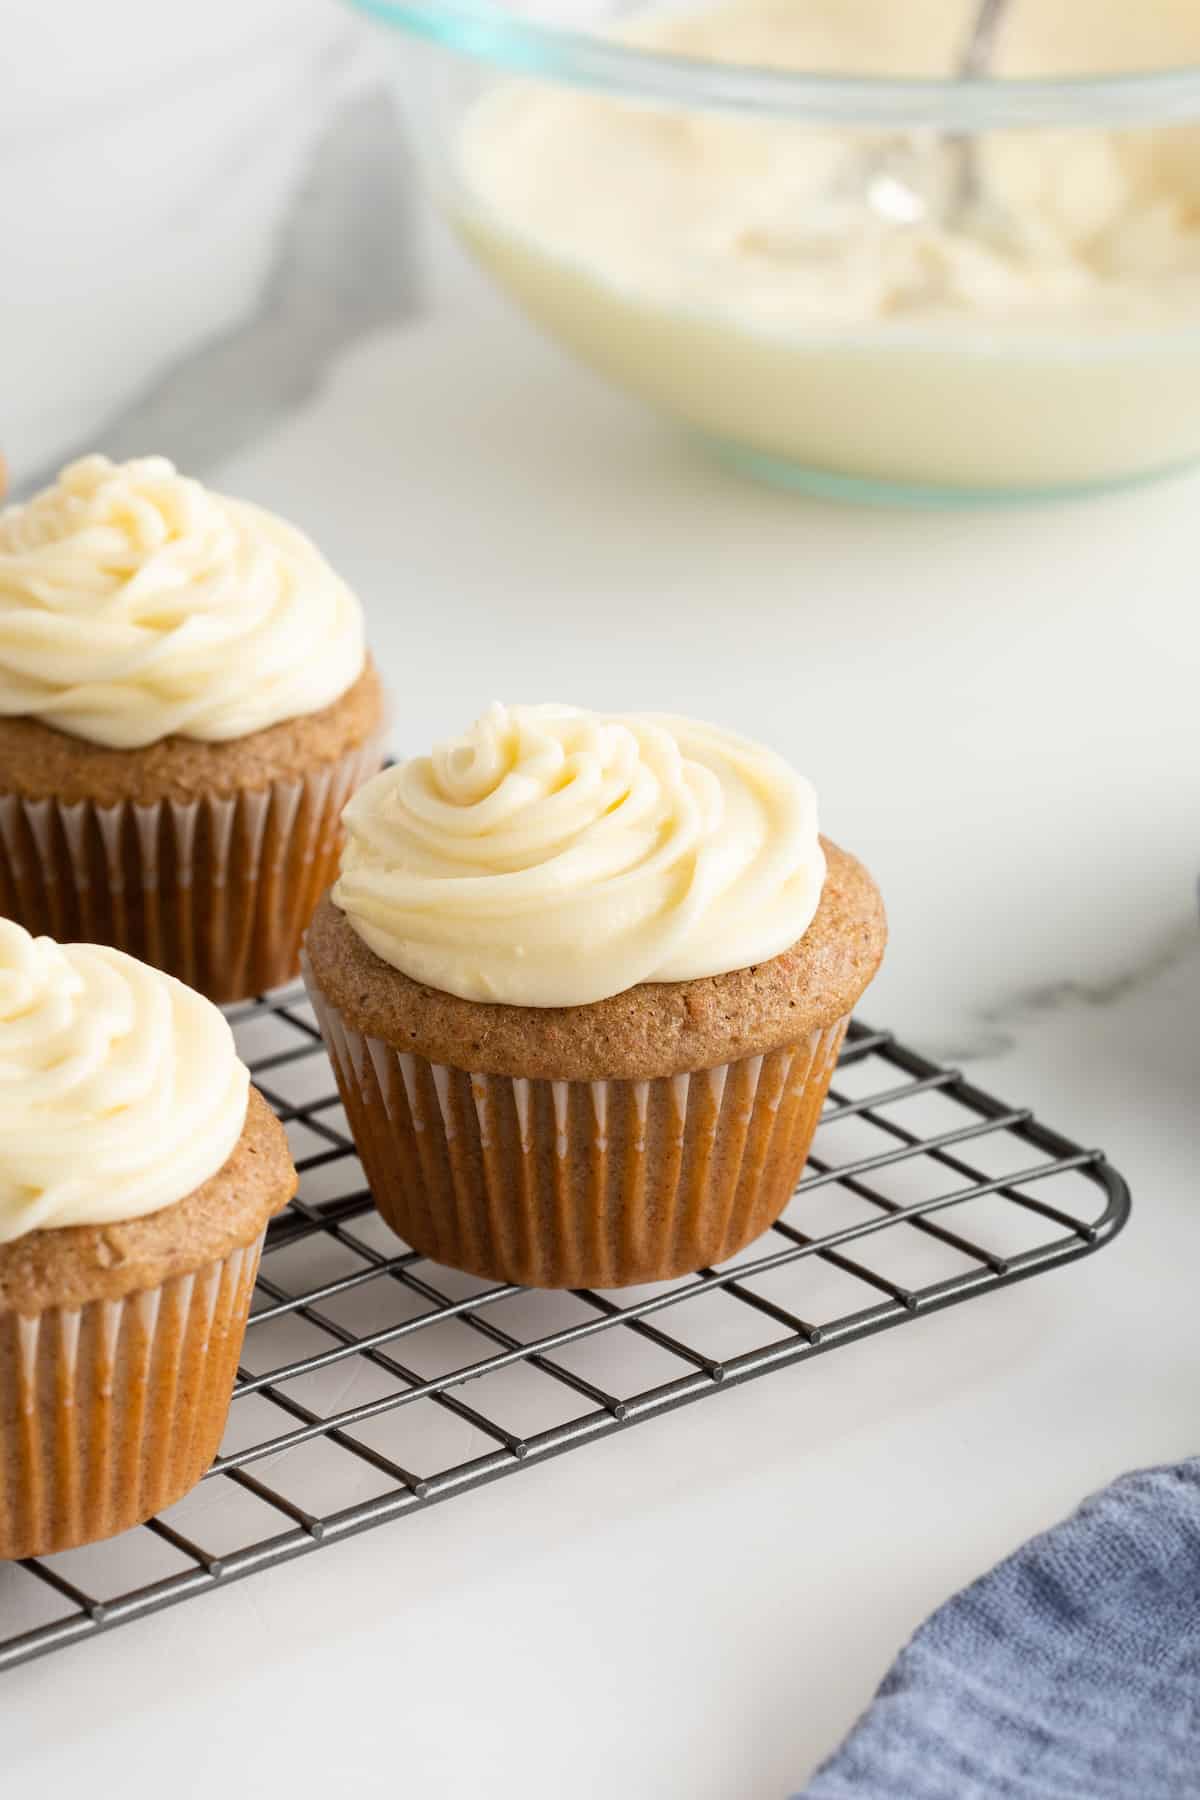 Three vanilla cupcakes with cream cheese frosting on a cooling rack.